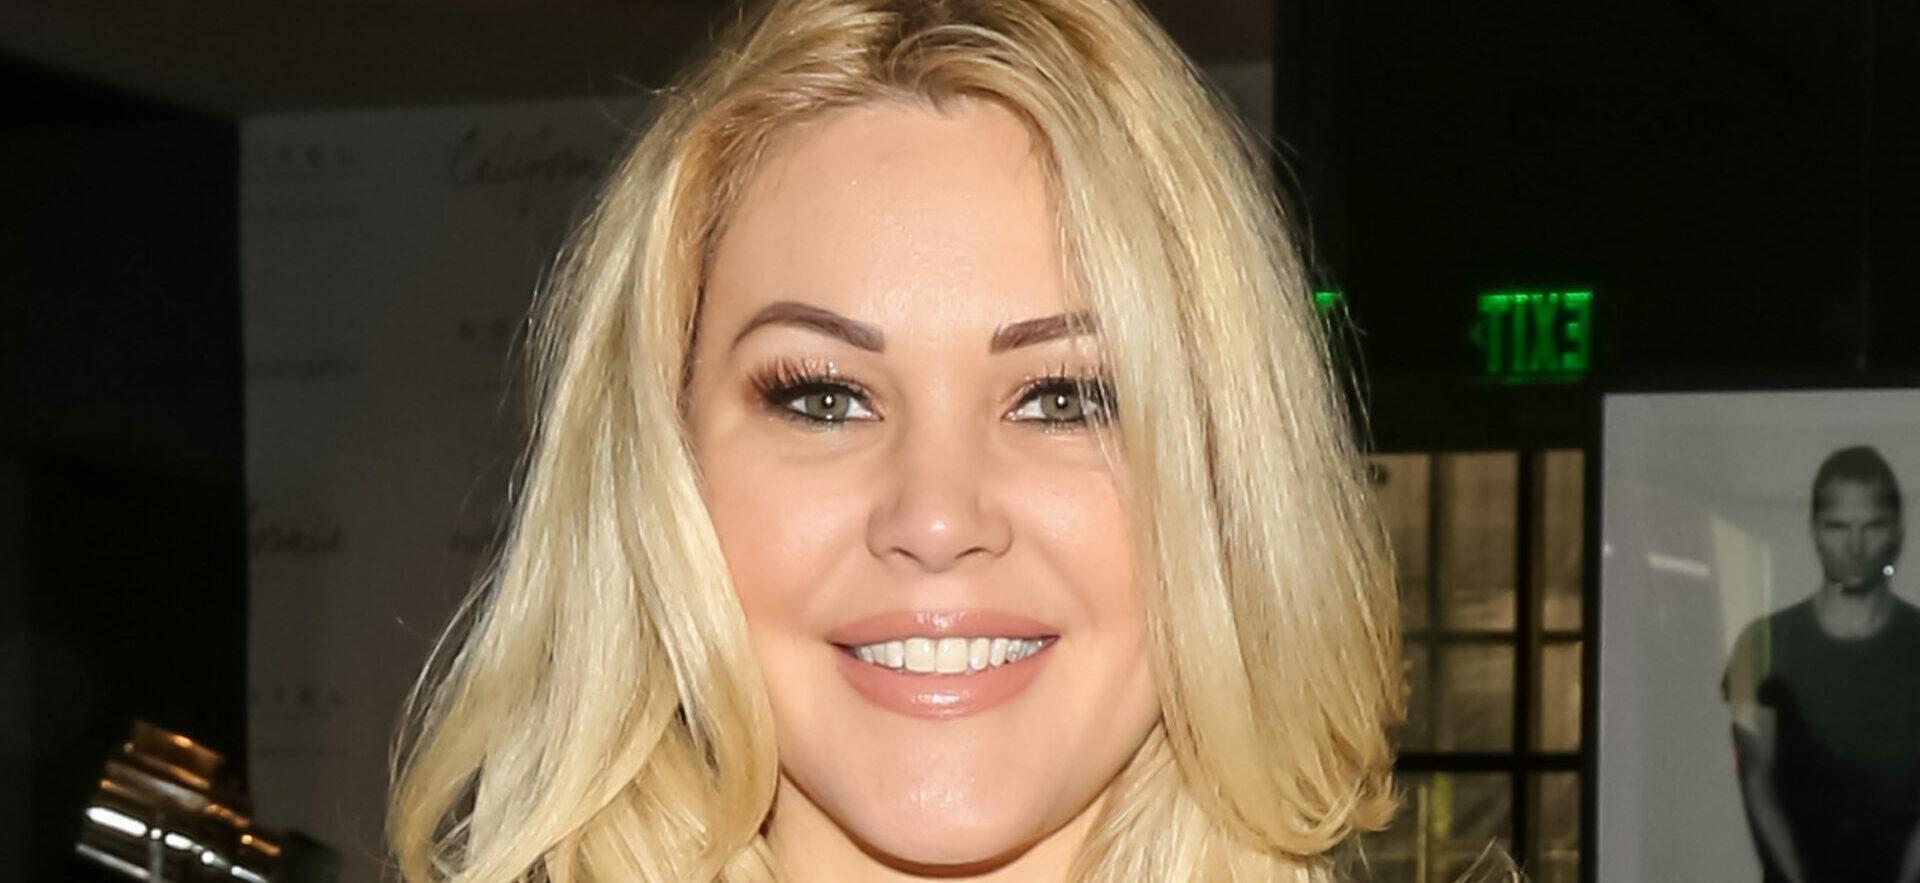 Shanna Moakler Puts Her Curves On Display In Plunging Skin-Tight Jump Short